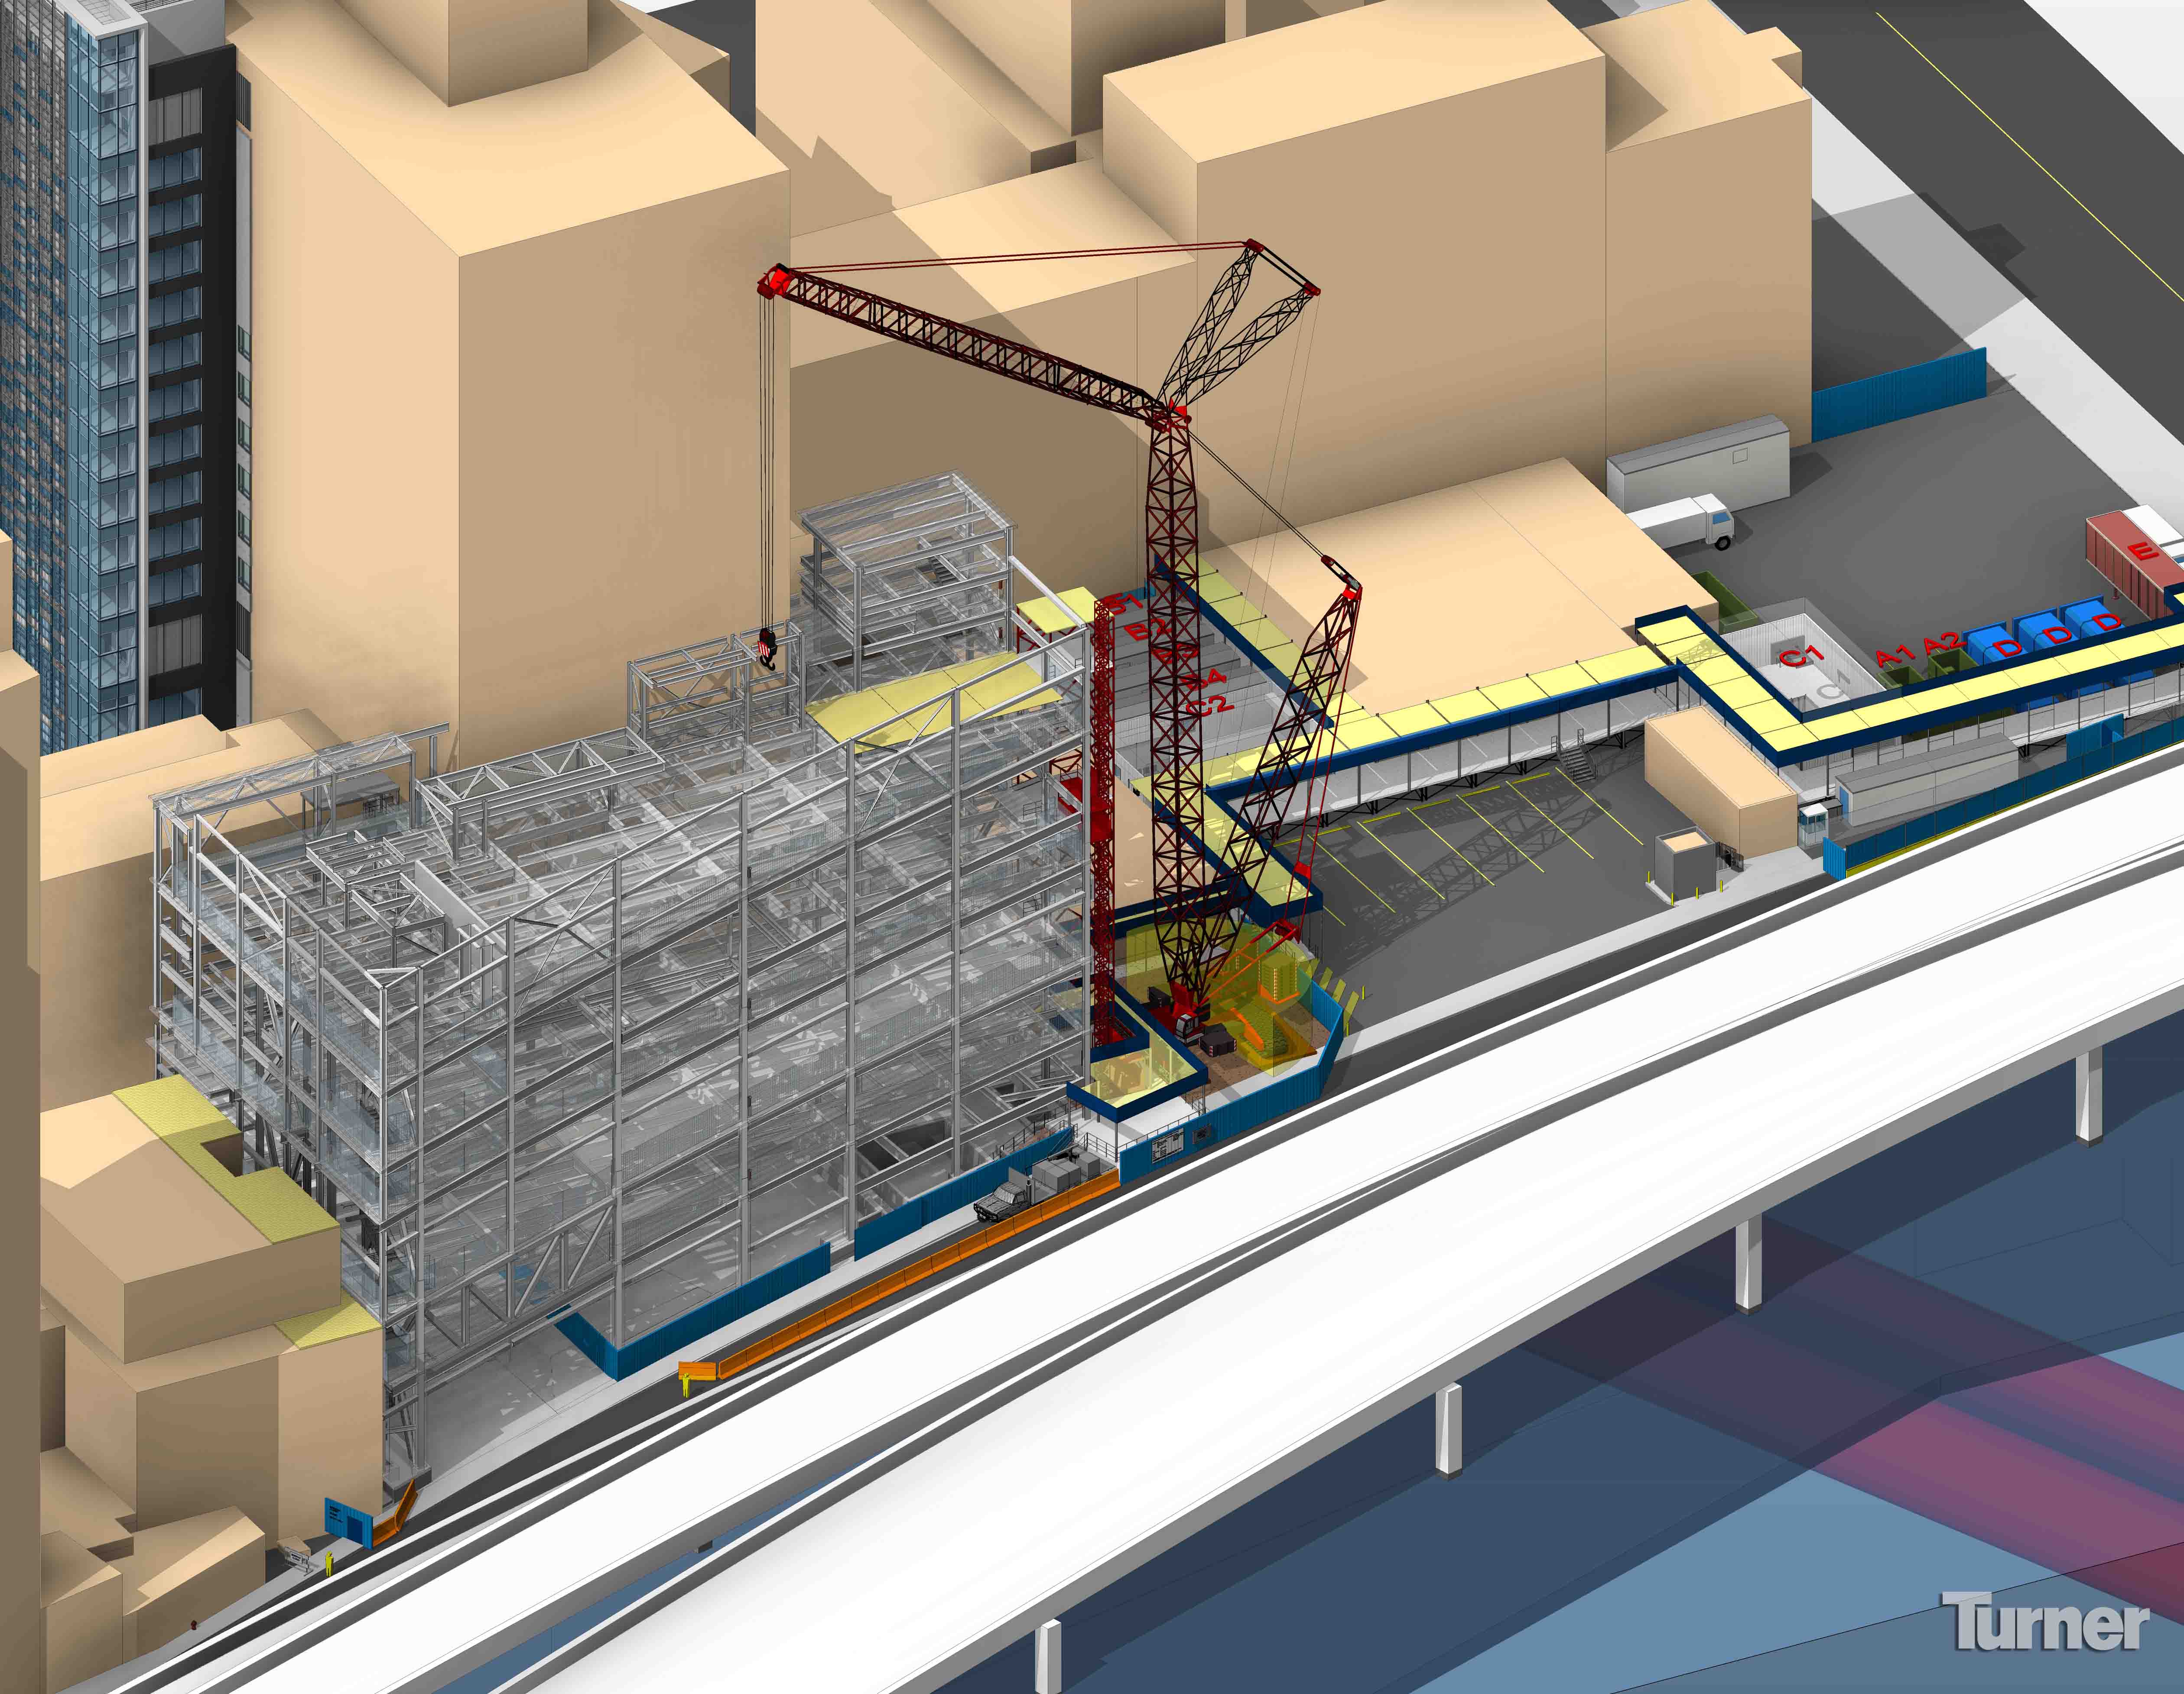 The virtual models and walkthroughs helped identify potential safety risks earli